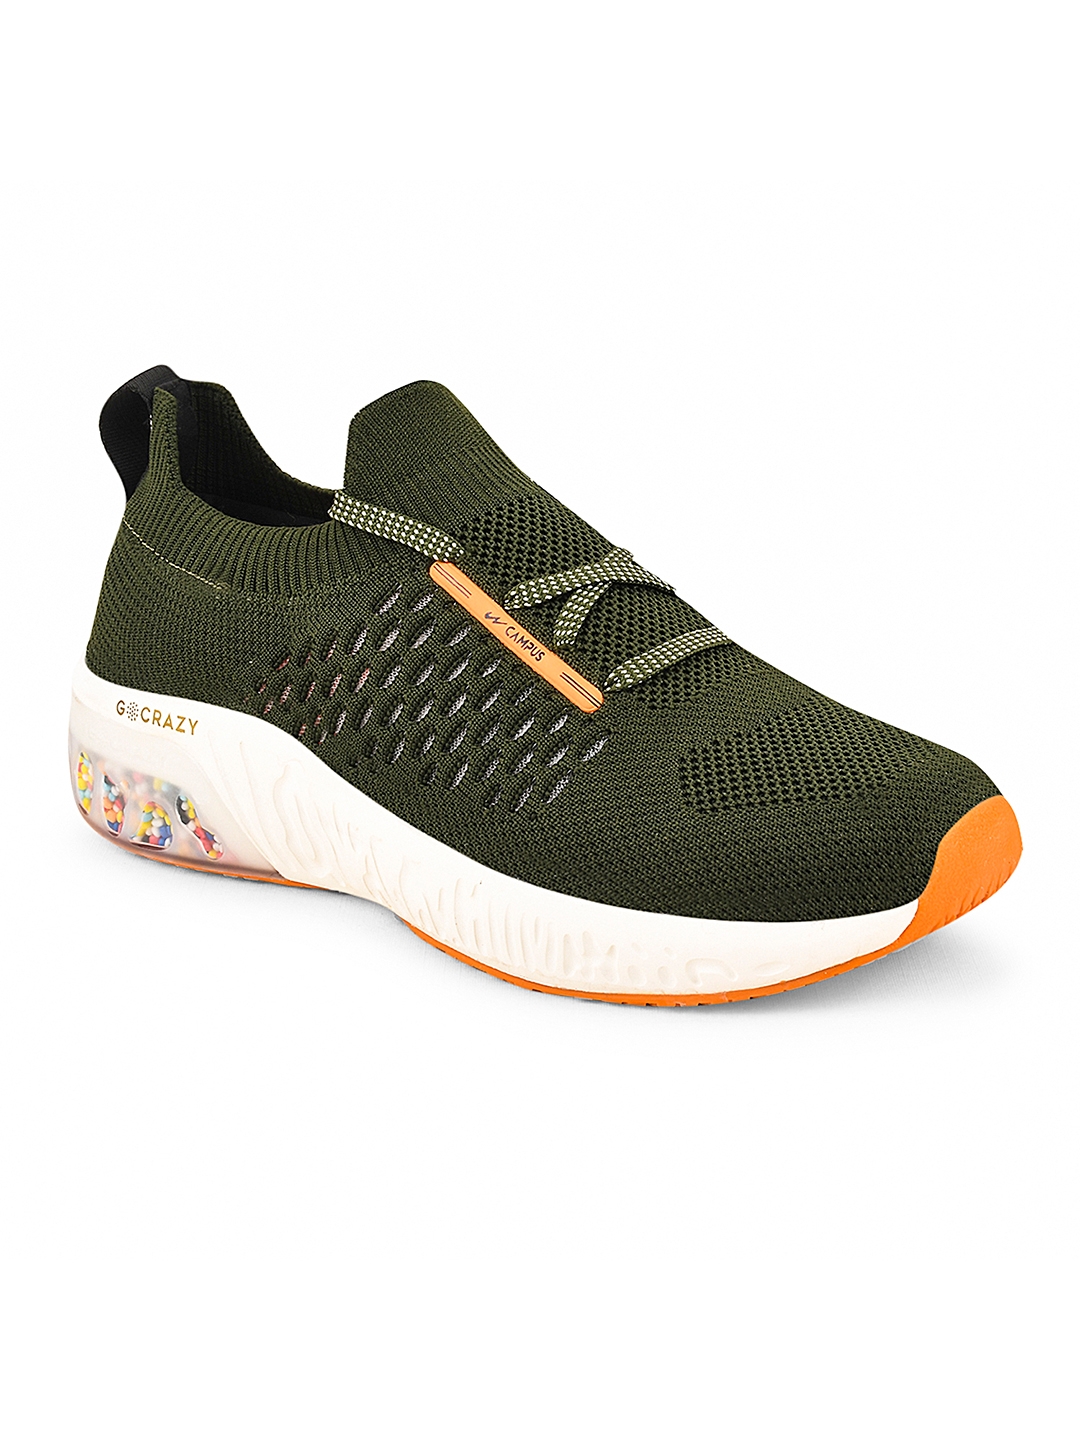 Campus Shoes | Boy's STREET Green Mesh Running Shoes